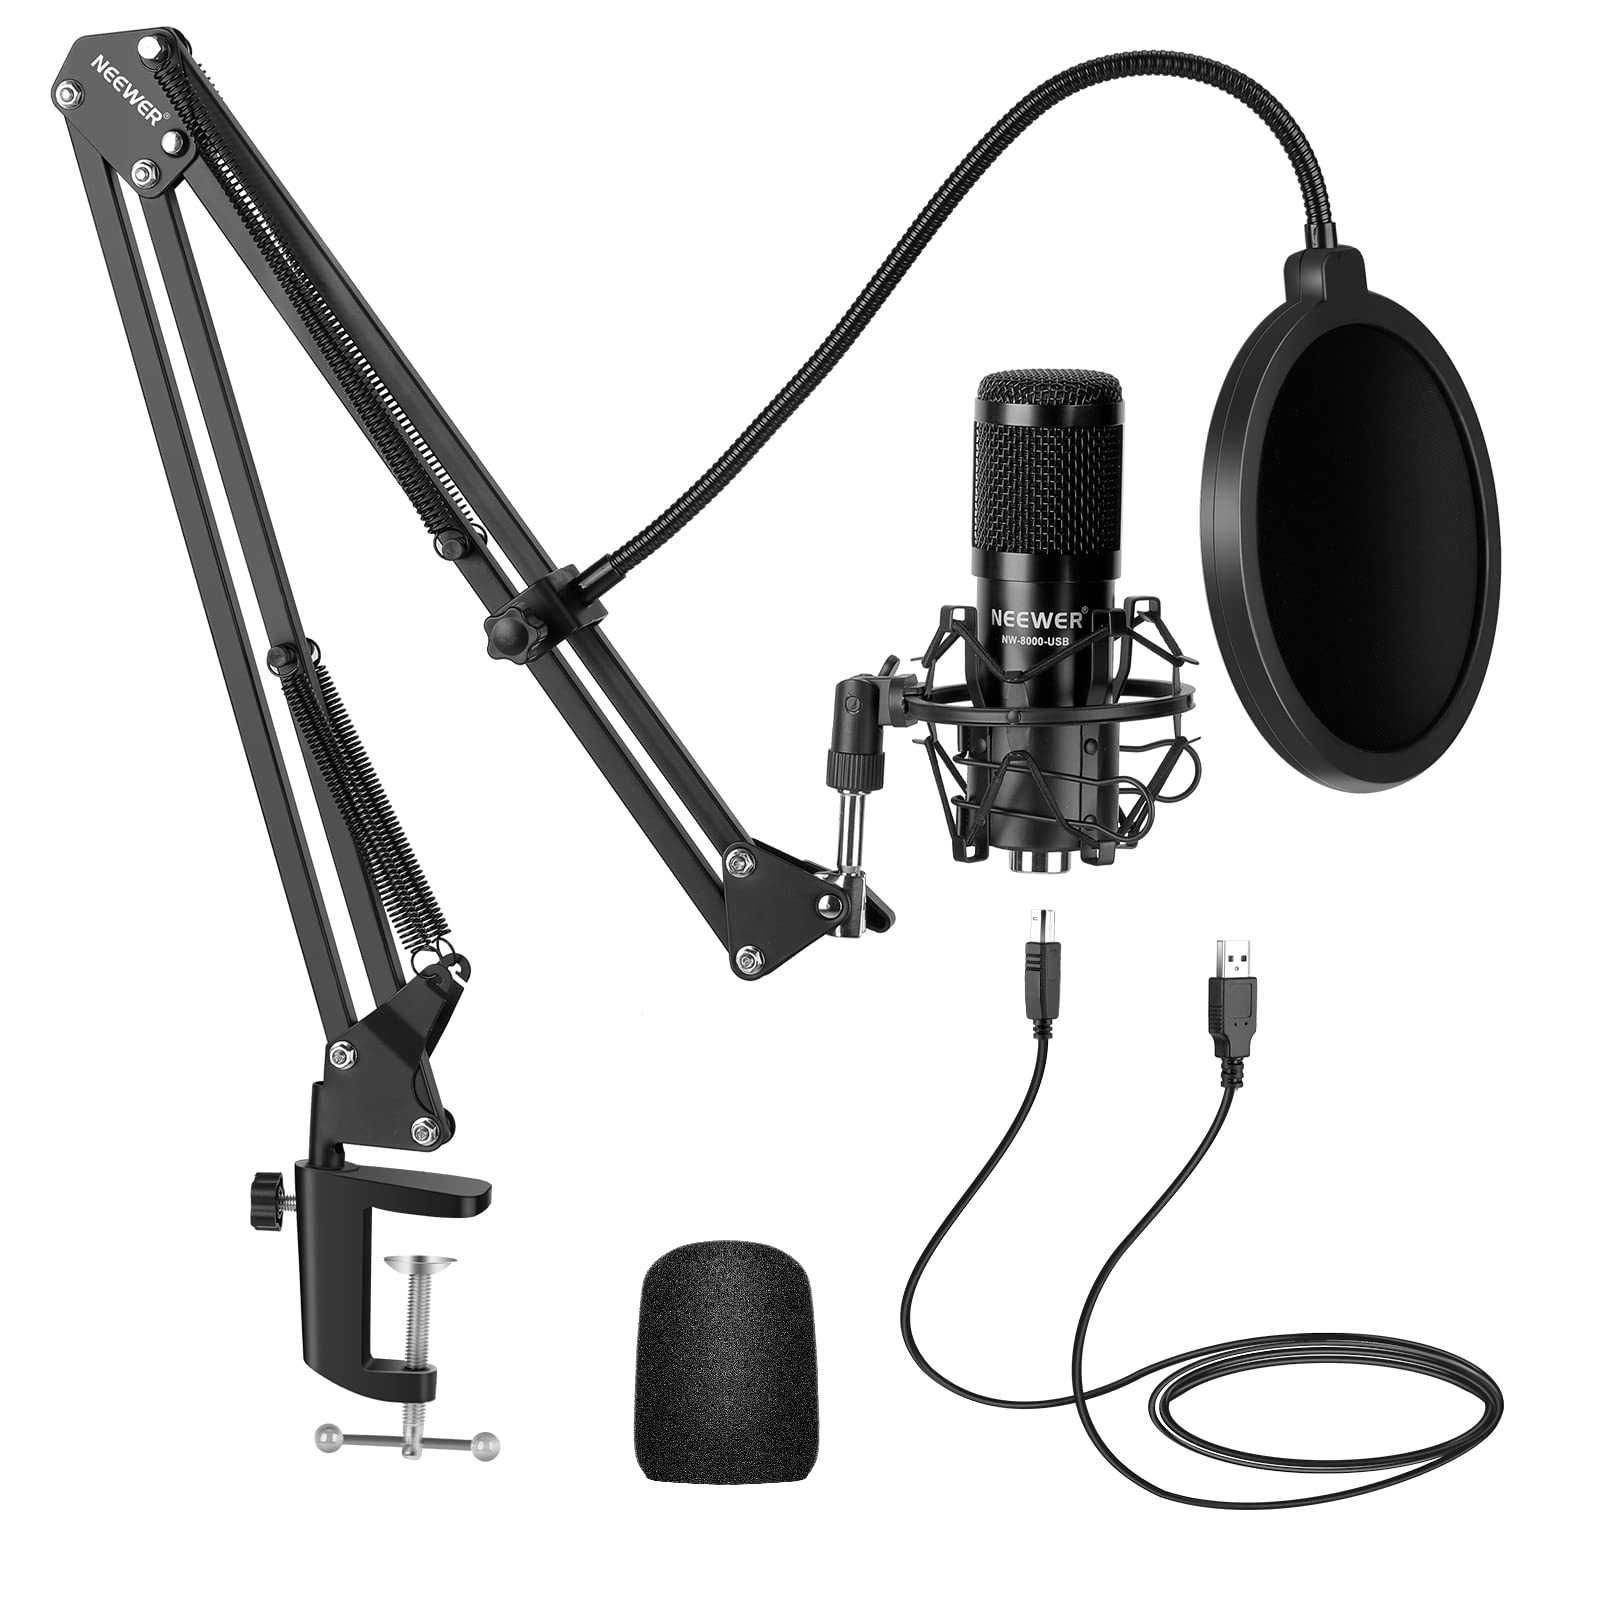 Amazon.com: NEEWER USB Microphone Kit, Plug & Play 192kHz/24-Bit Supercardioid Condenser Mic with Boom Arm and Shock Mount $18.55